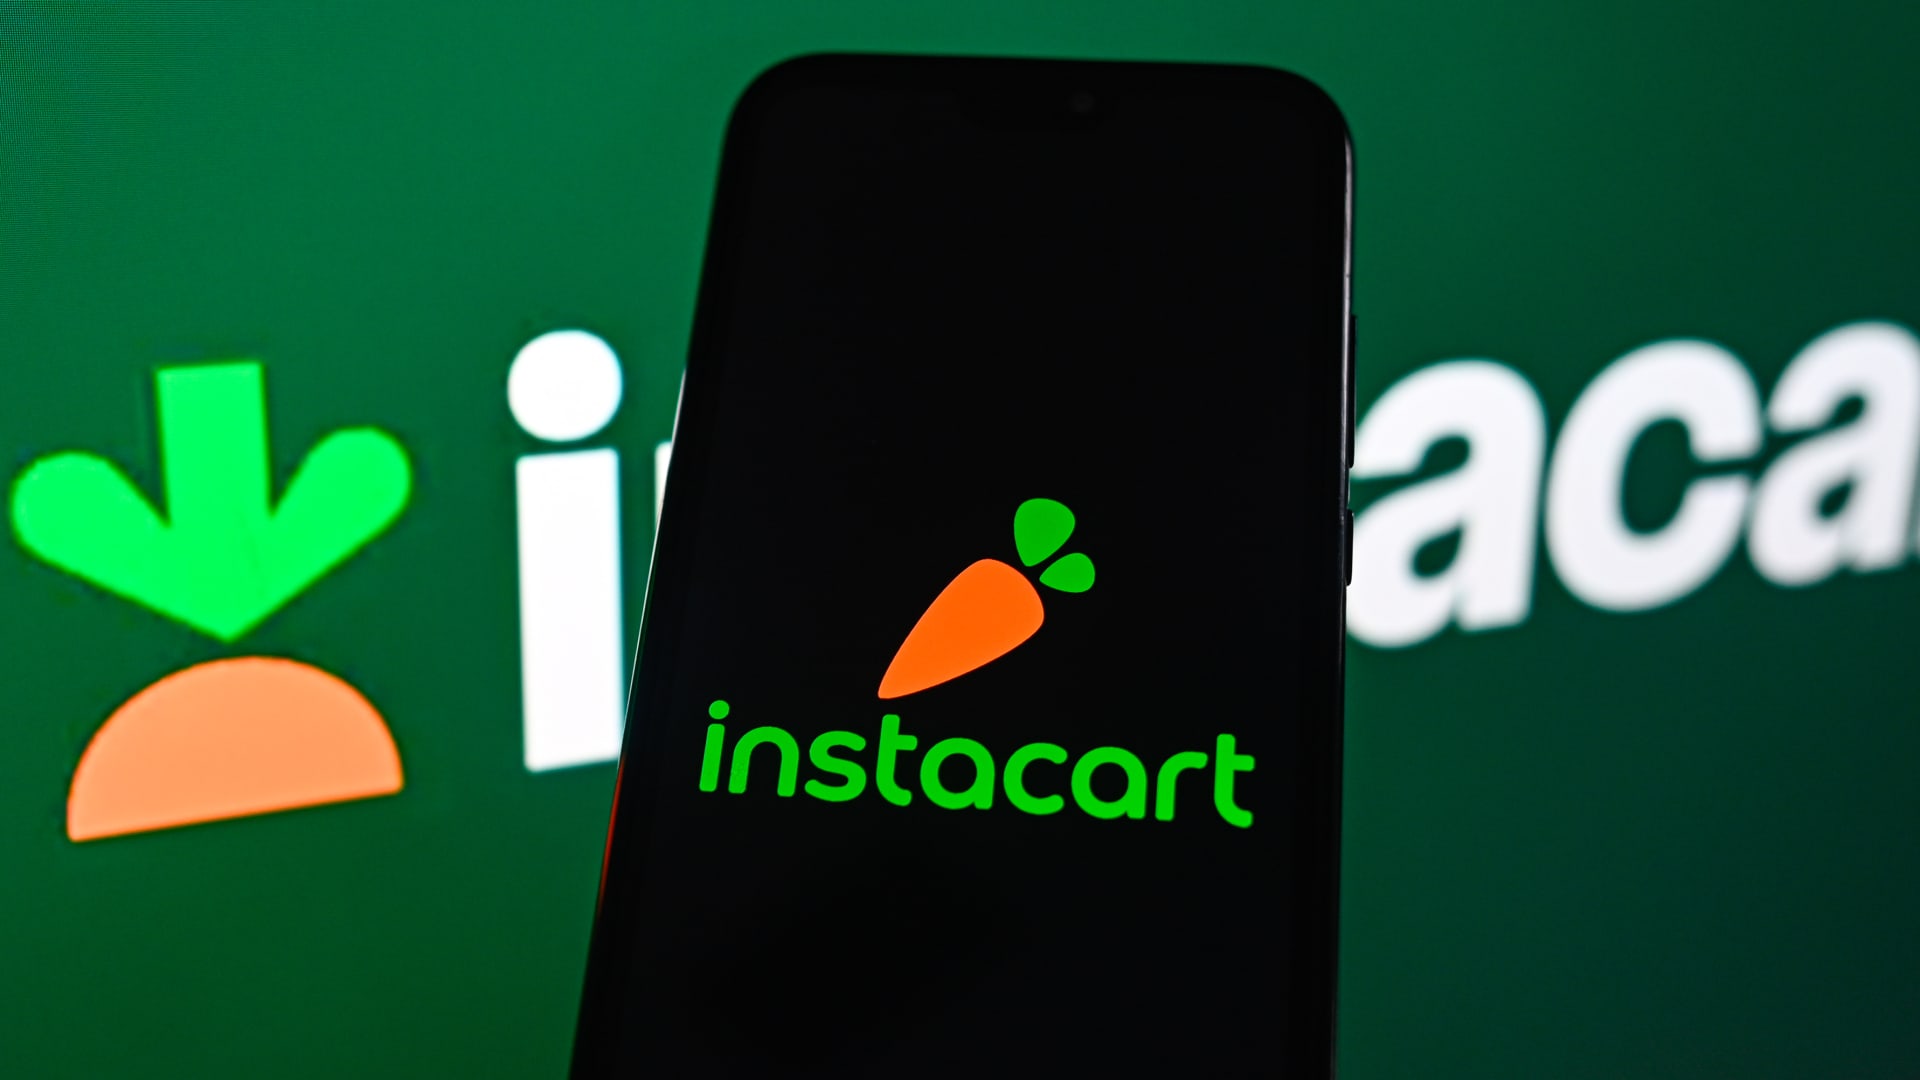 Cramer examines Instacart’s IPO, says he’s ‘torn’ on the stock